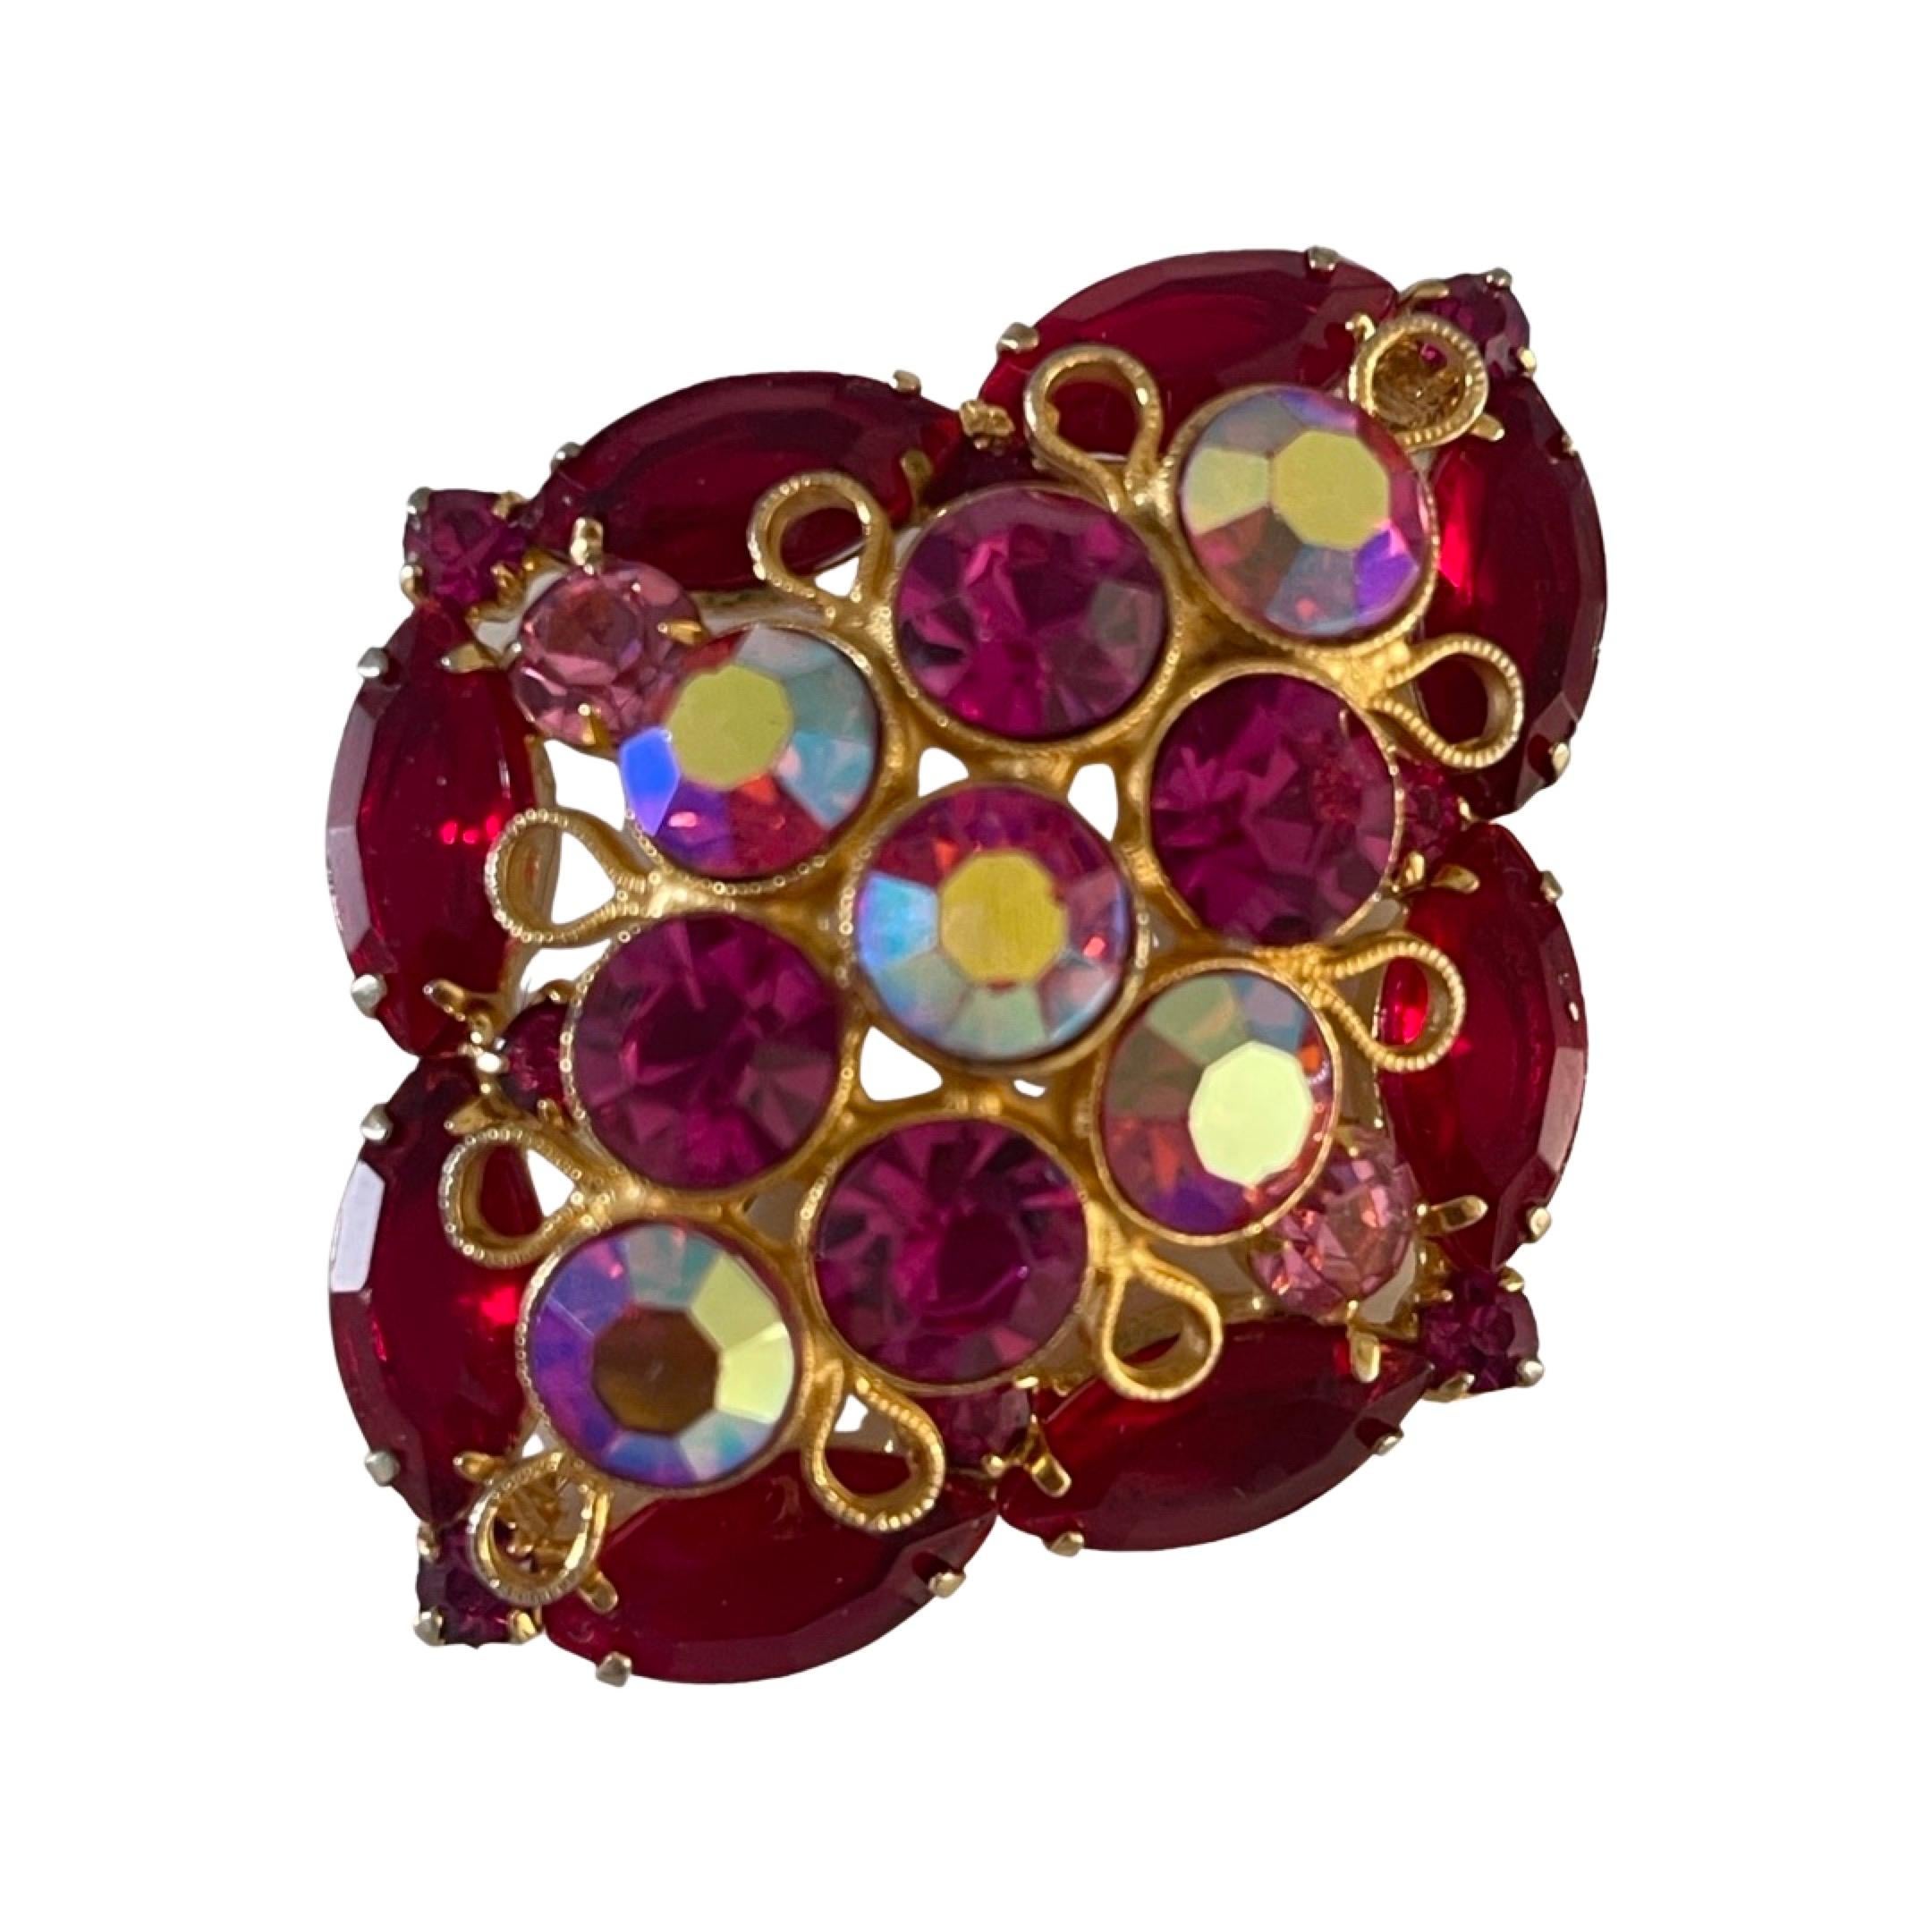 Domed shape brooch is embellished with marquise cut ruby red rhinestones, round-shaped rose pink rhinestones, round-shaped aurora borealis rhinestones, and lastly the four tiny square red rhinestones that compliment the four edges of the brooch. 